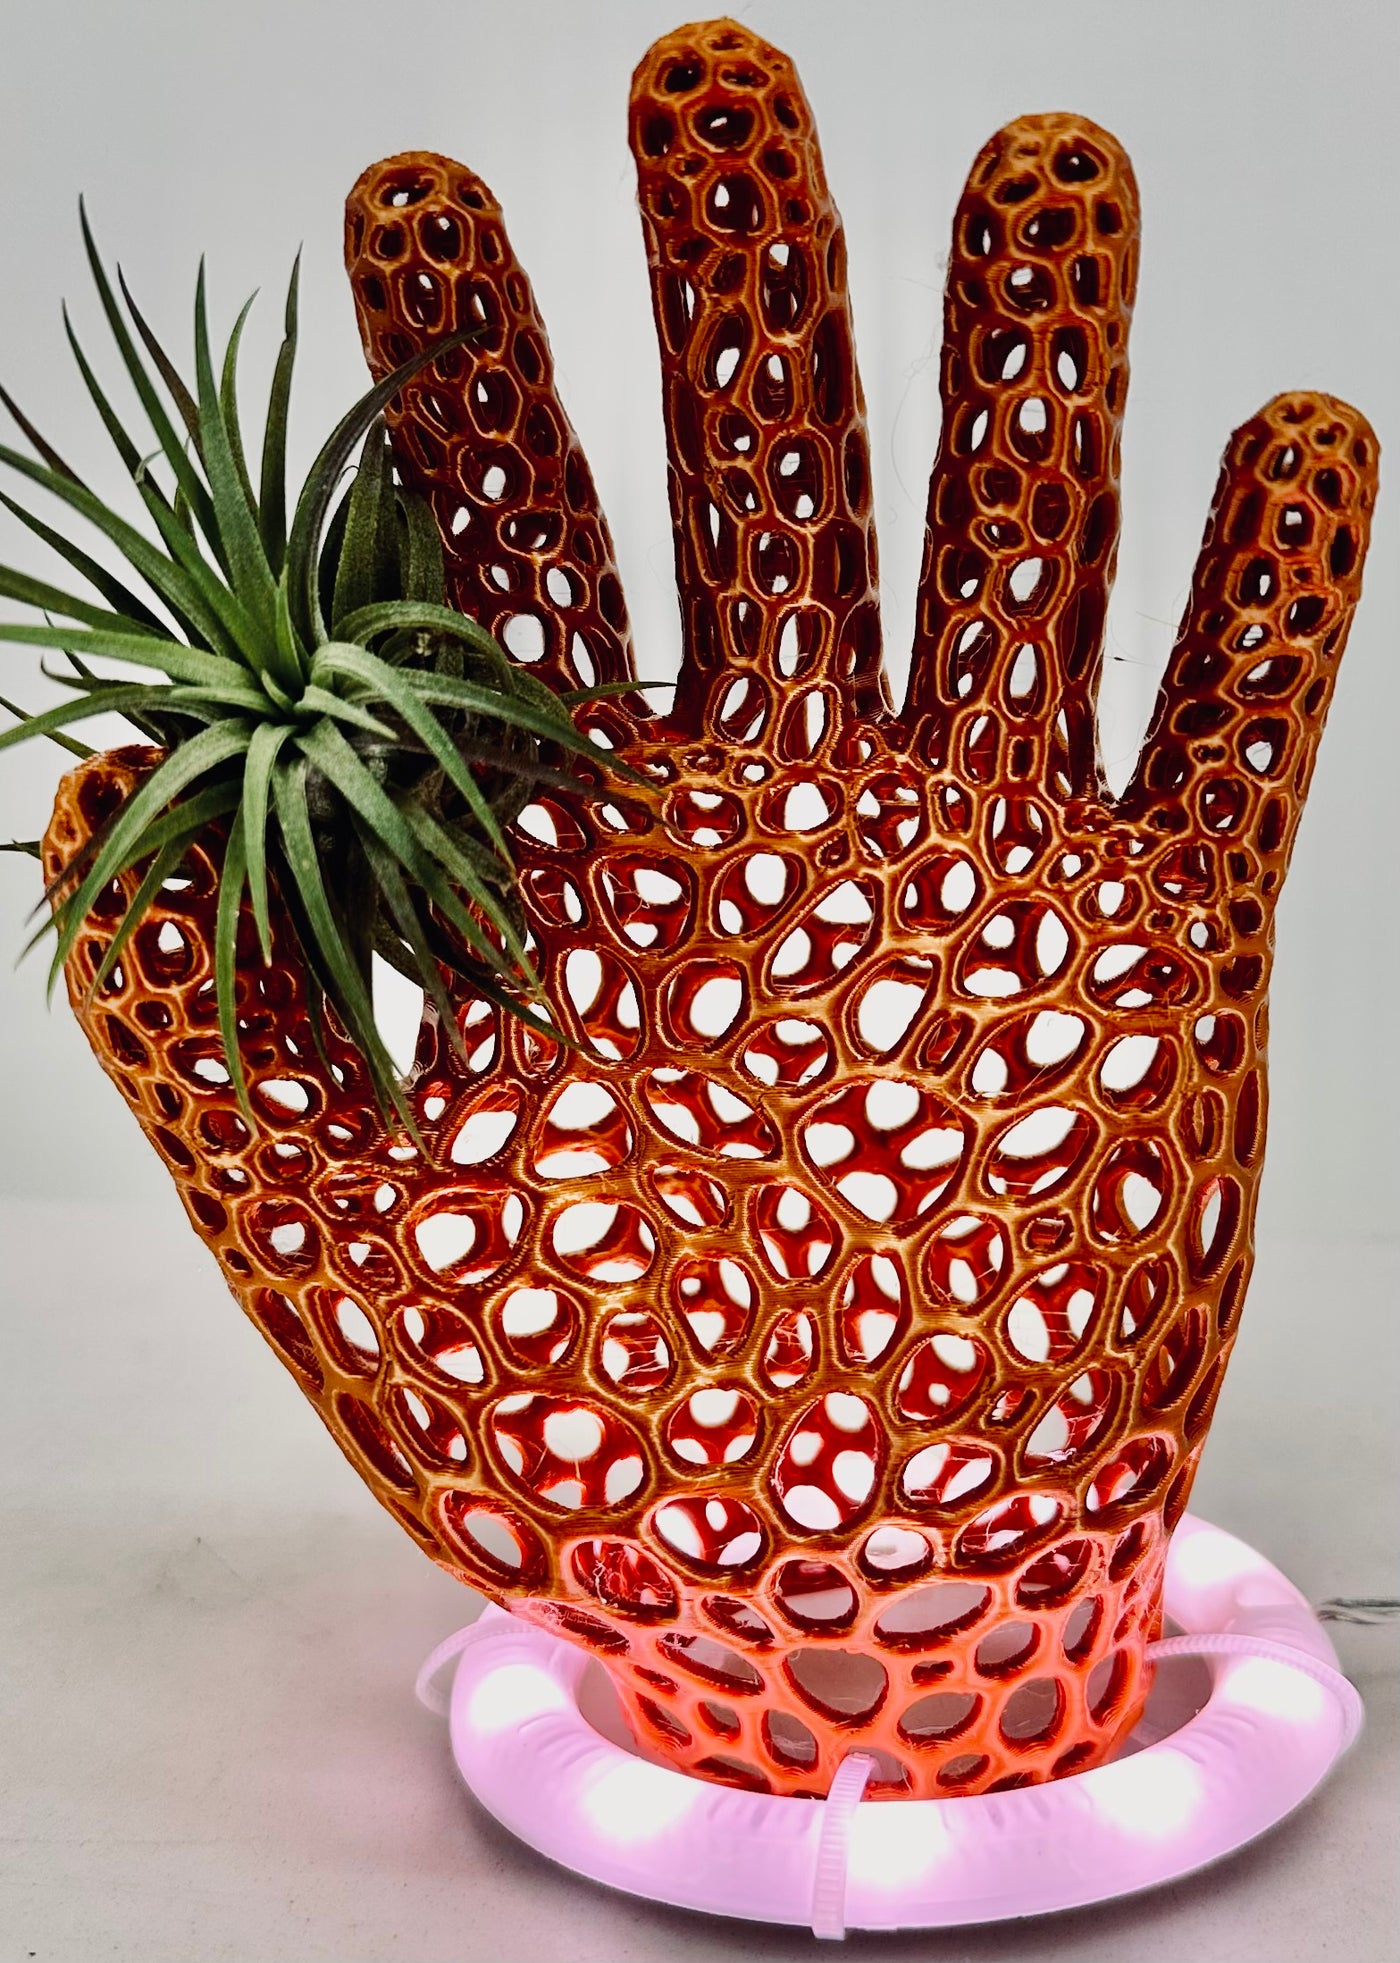 Give 'Em A Hand -  This 3d printed hand is available in gold or silver and comes with an easy-to care-for air plant, along with a grow light base ring  - $24.95 - ($5.00 OFF regular price of $29.95 for a limited time)